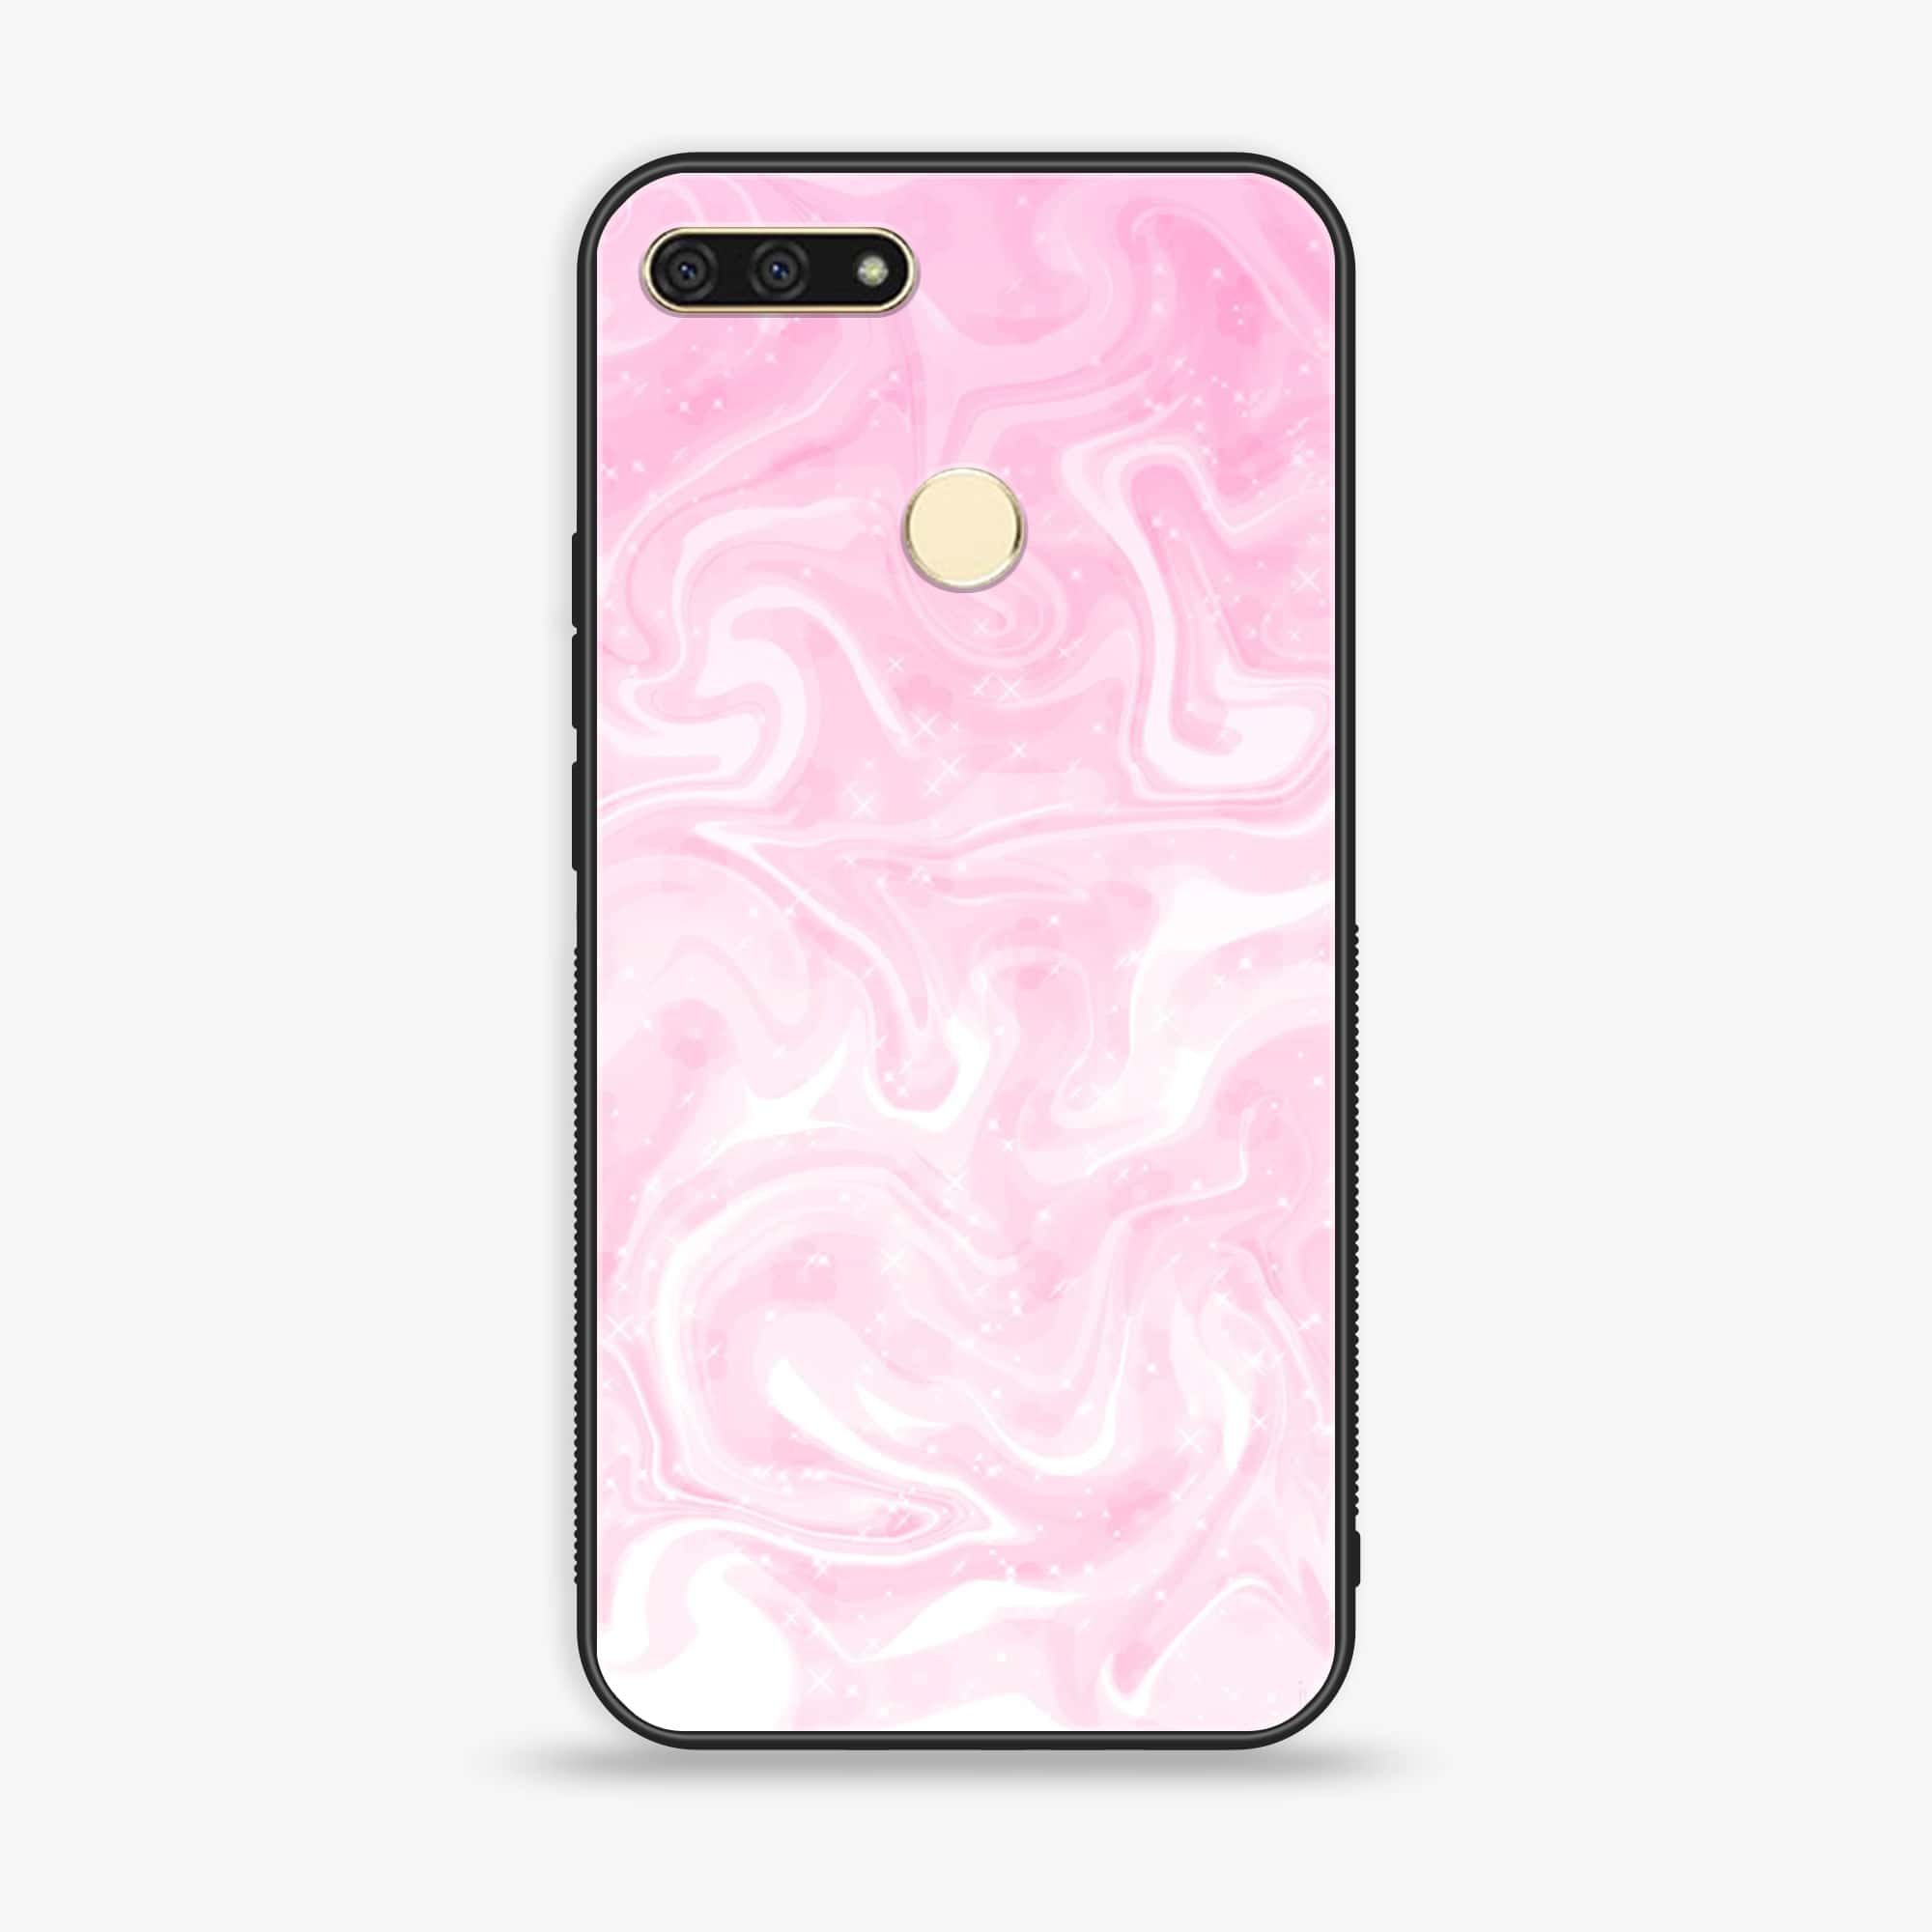 Huawei Y6 2018/Honor Play 7A - Pink Marble Series - Premium Printed Glass soft Bumper shock Proof Case